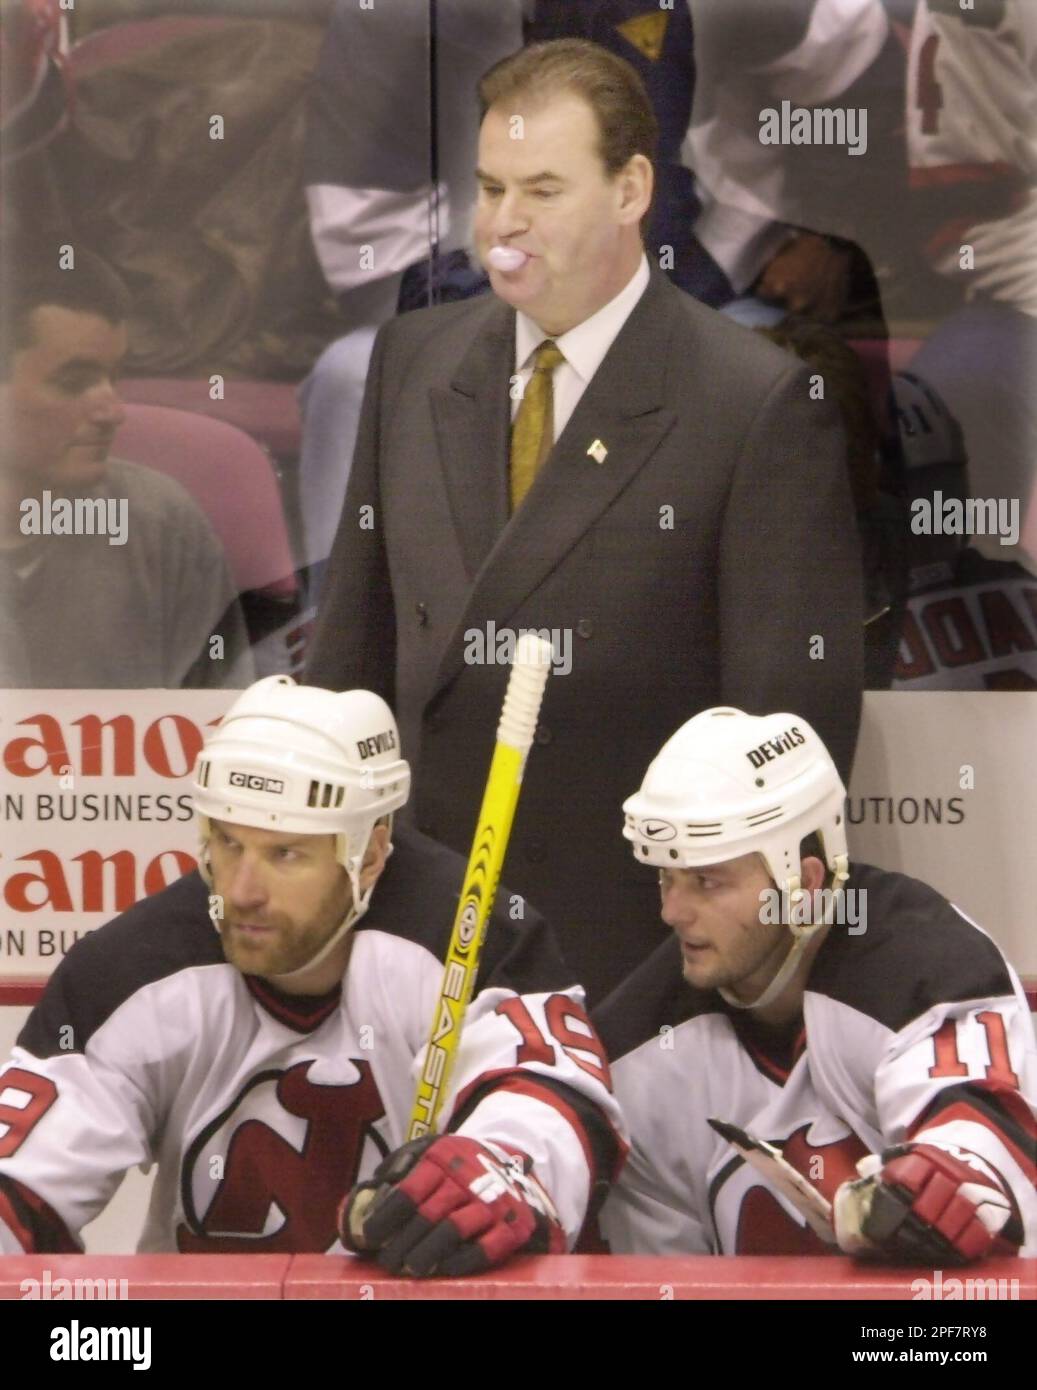 https://c8.alamy.com/comp/2PF7RY8/new-jersey-devils-coach-pat-burns-top-blows-a-bubble-as-he-and-players-jim-mckenzie-left-and-john-madden-watch-the-final-minute-of-their-3-0-shutout-over-the-boston-bruins-in-game-5-of-a-first-round-playoff-series-thursday-april-17-2003-in-east-rutherford-nj-the-devils-won-the-series-four-games-to-one-ap-photodaniel-hulshizer-2PF7RY8.jpg